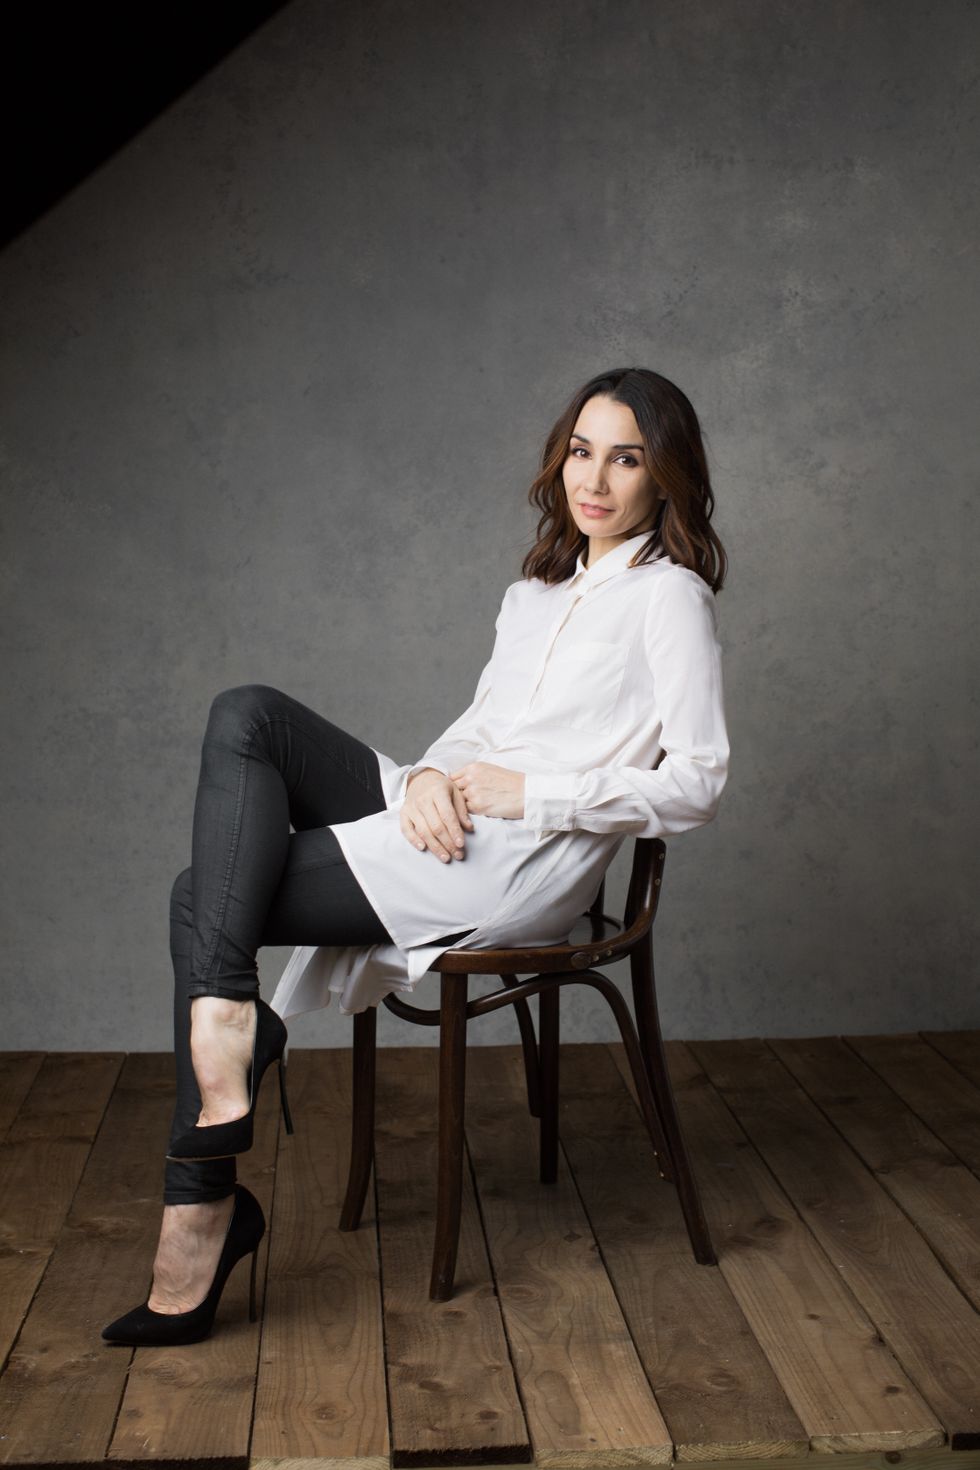 Tamara Rojo, brown hair in loose curls around her face and wearing a white button down, black trousers and high heels, reclines elegantly in a wooden chair.